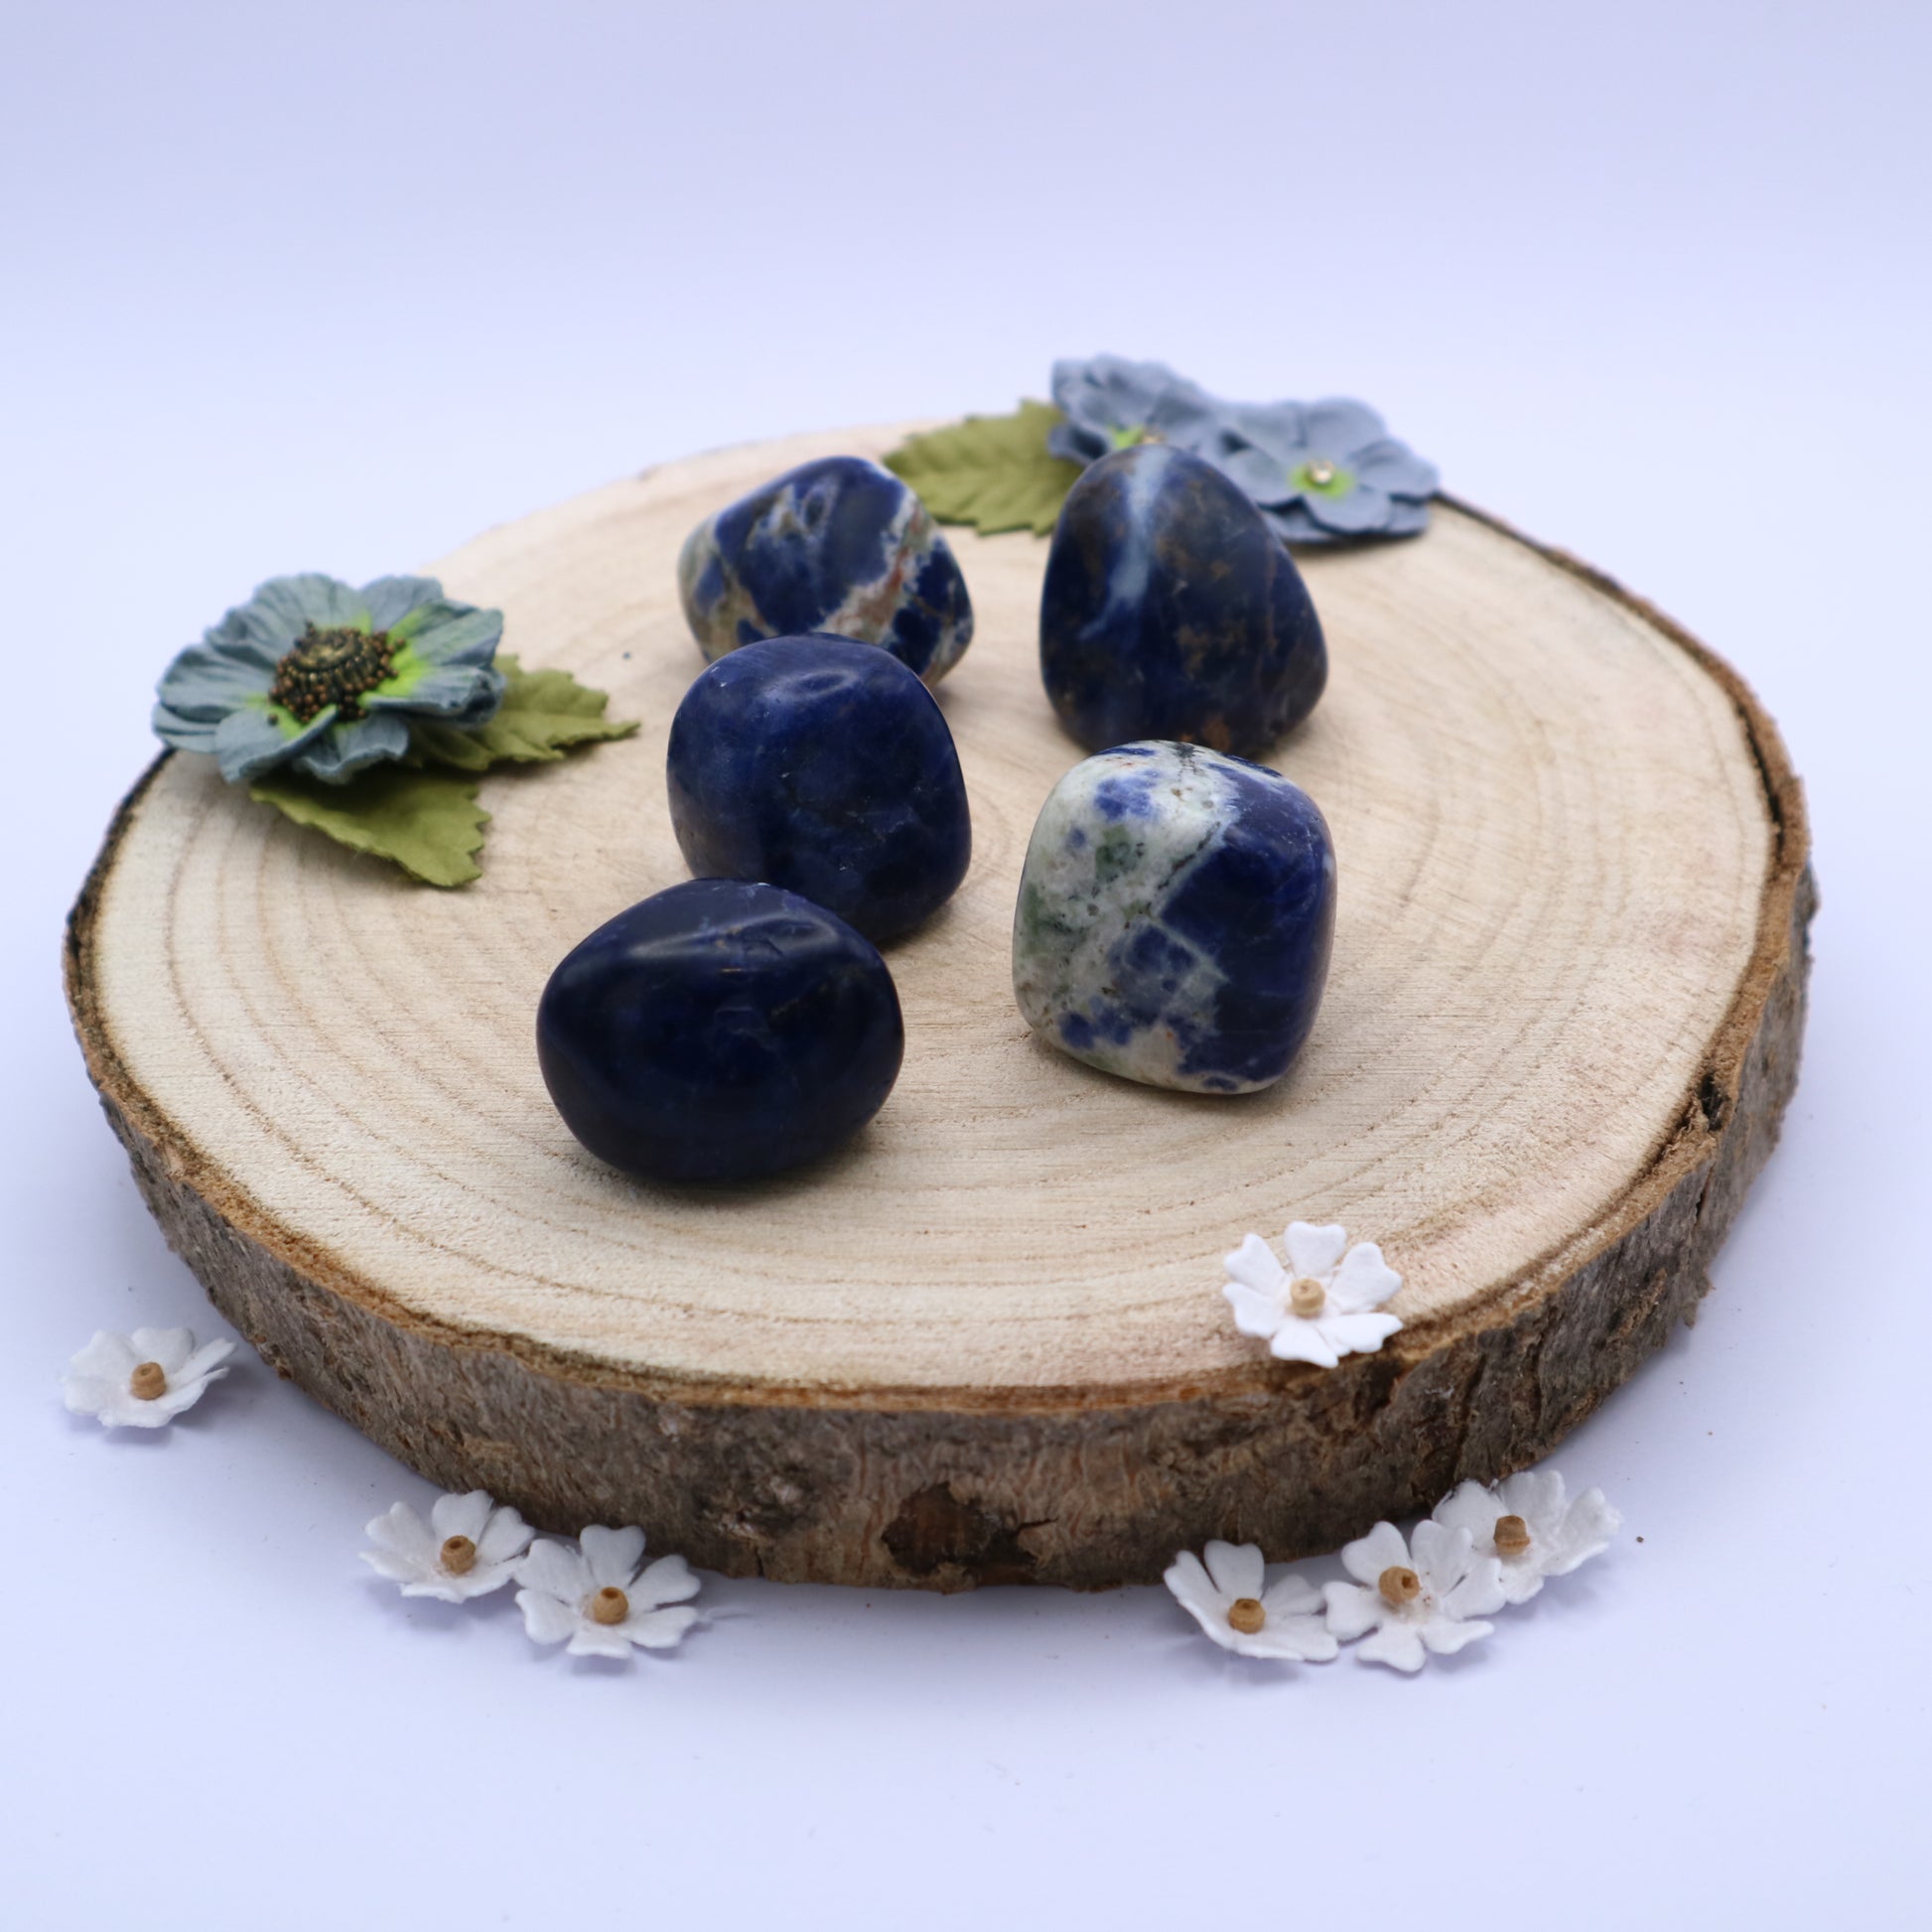 Five pieces of Sodalite crystals displayed on a piece of wood surrounded by flowers